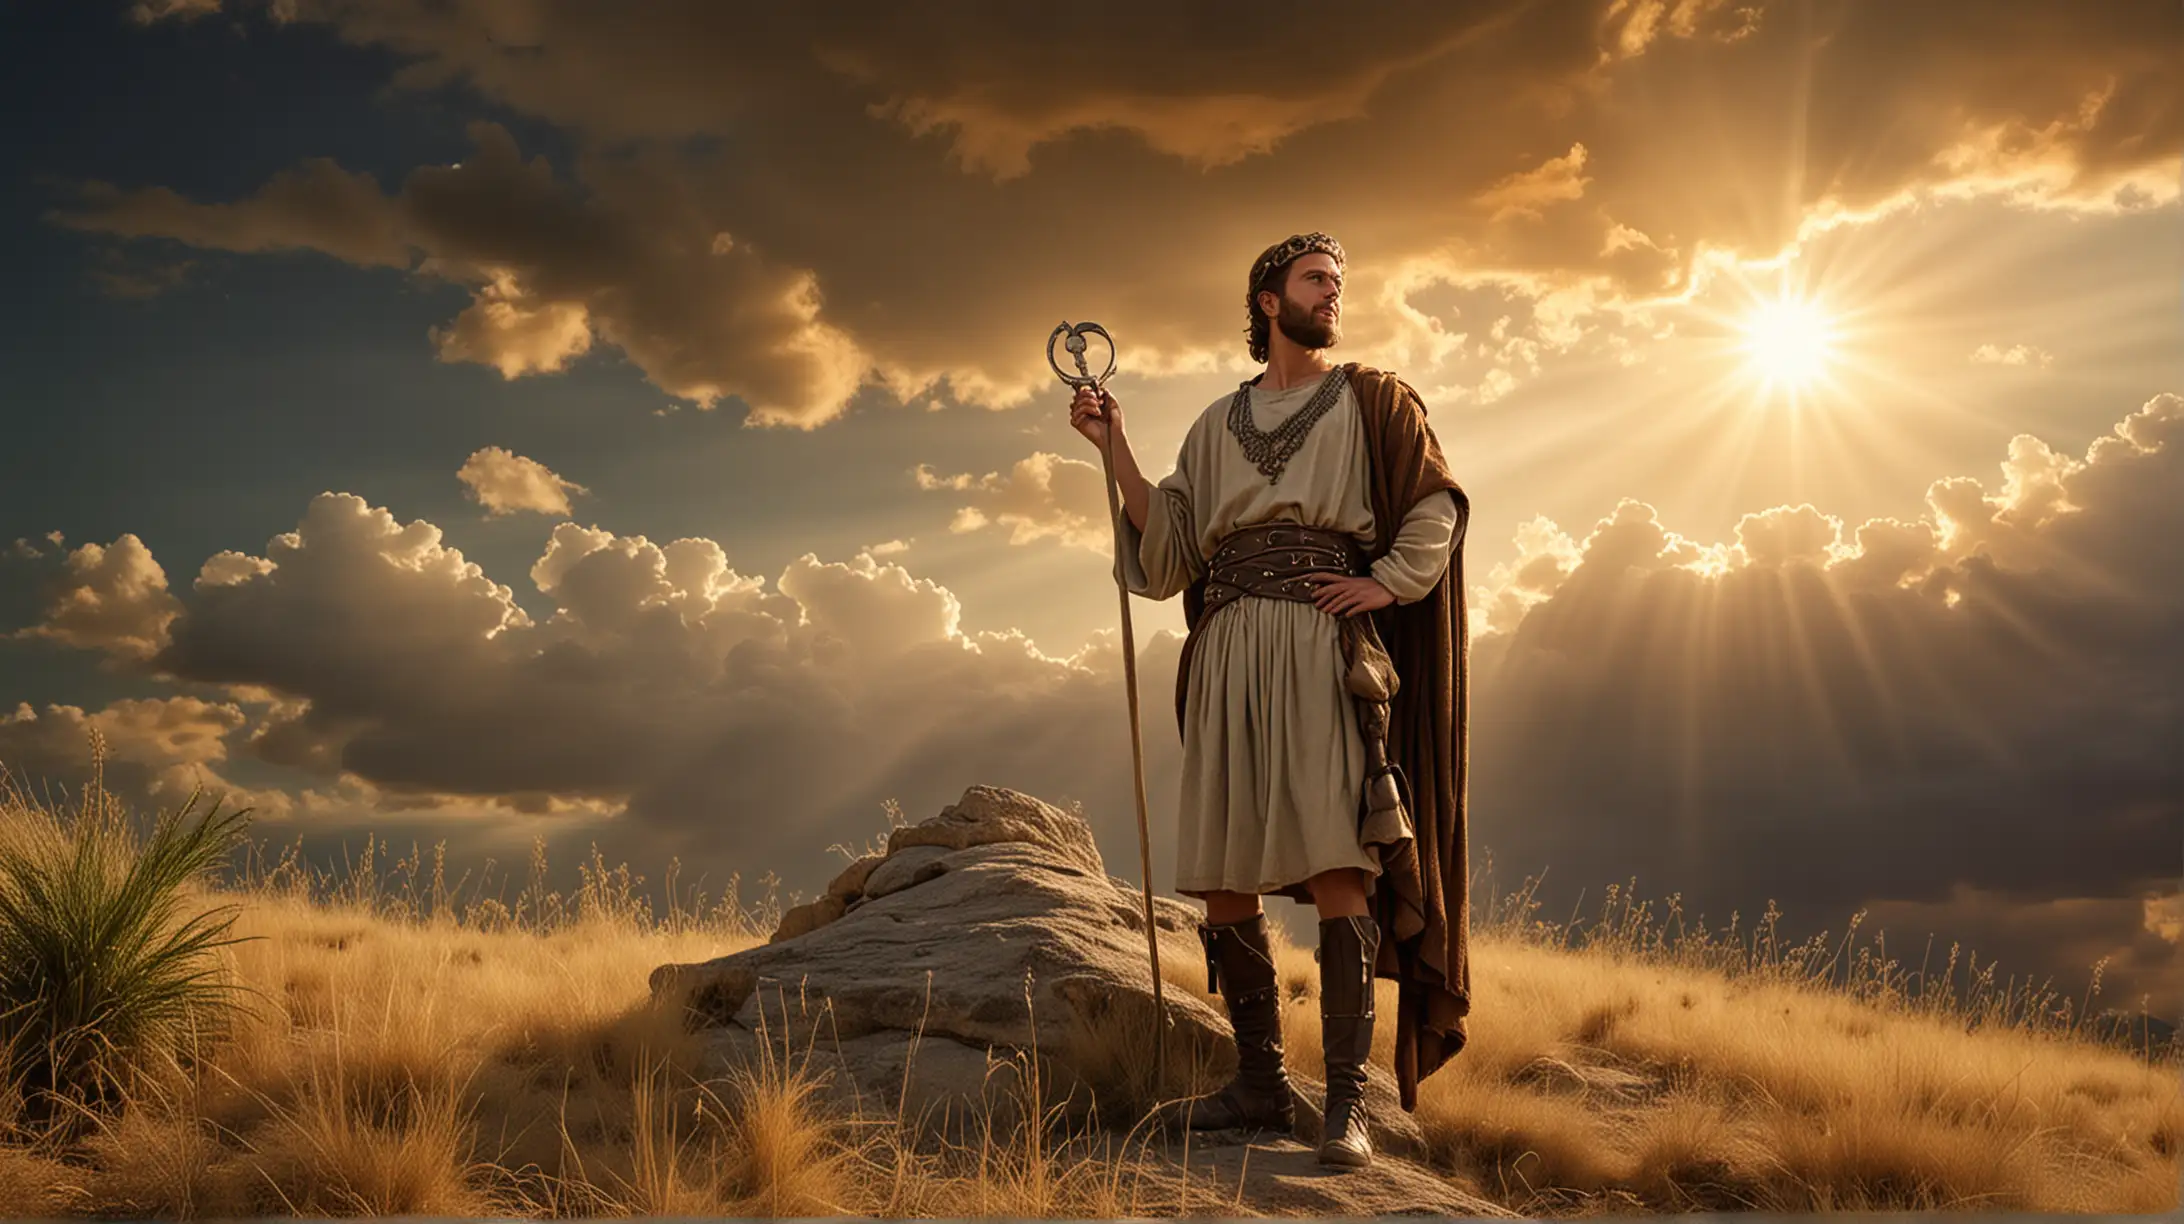 A handsome King David talking to God.  Set on a desert grassy hill, with a magnificent sky. Set during the biblical era of King David.